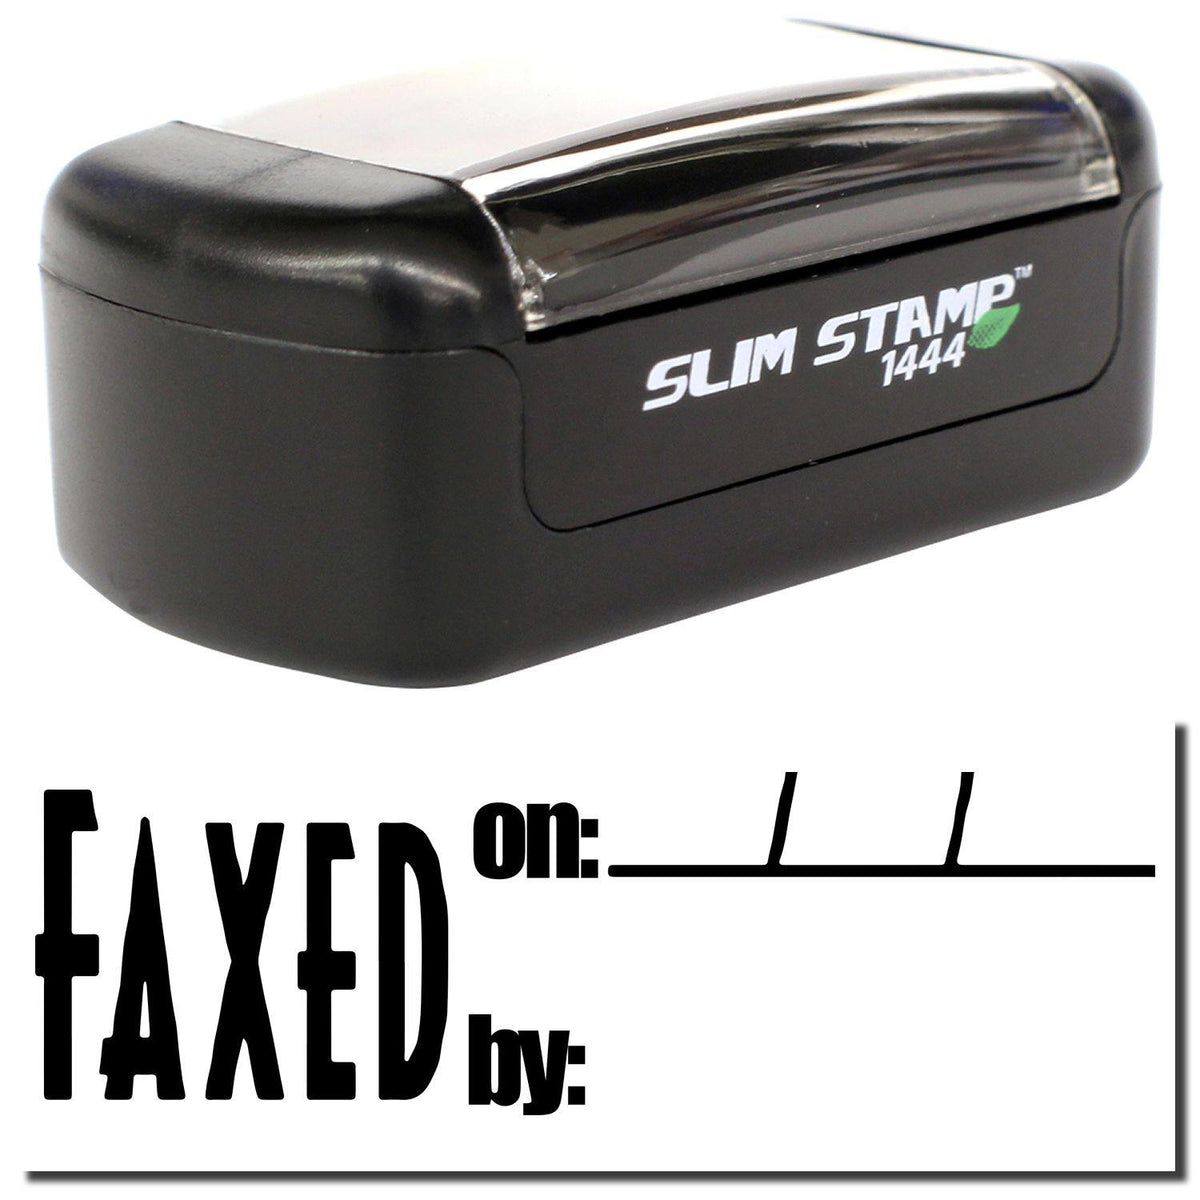 A stock office pre-inked stamp with a stamped image showing how the text &quot;FAXED on:&quot; in bold font with a space for writing the date and name of the person (by:) is displayed after stamping.